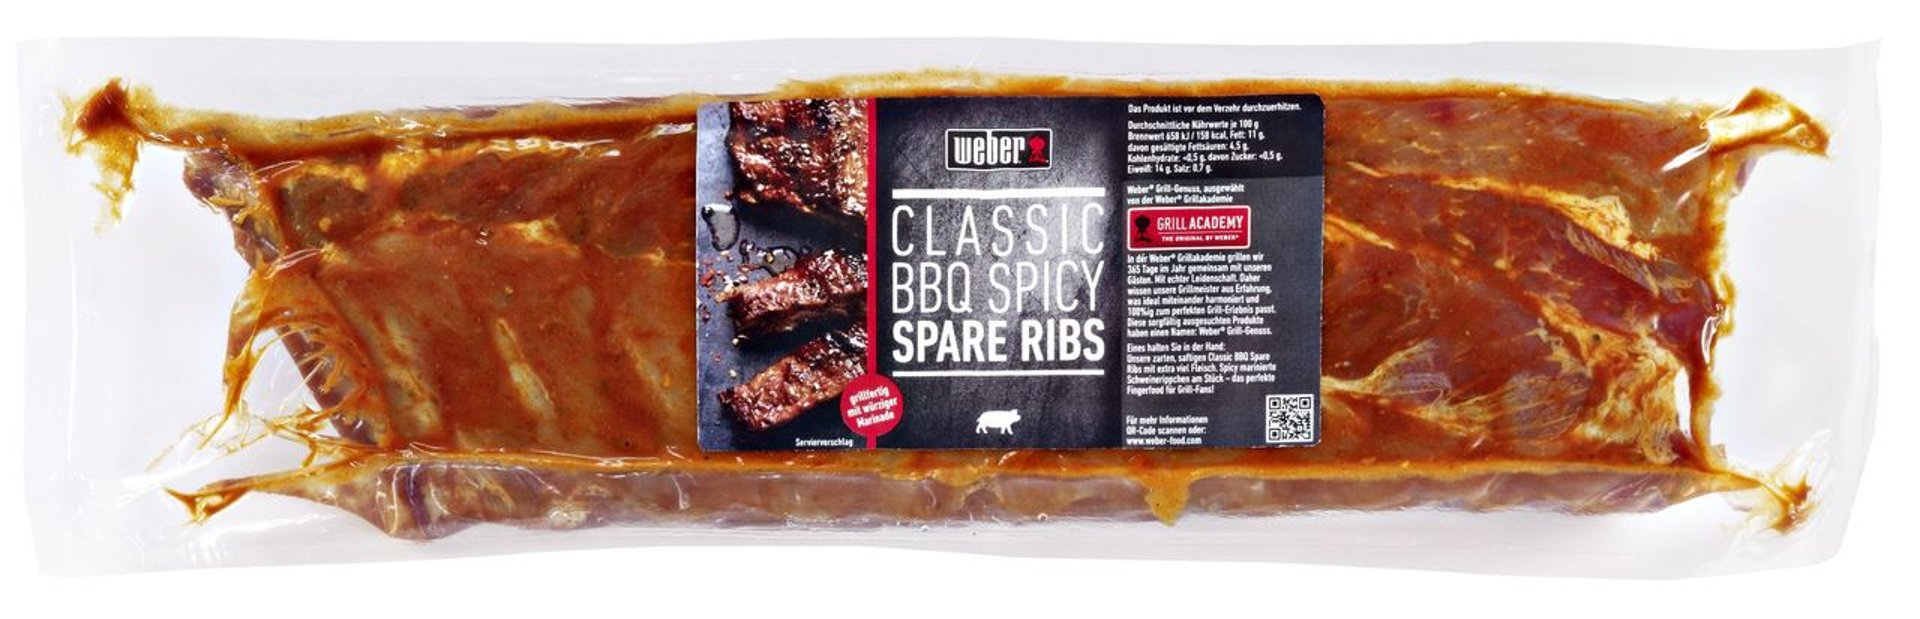 Weber - QS Weber Spare Ribs Barbeque ca. 800 g Packung